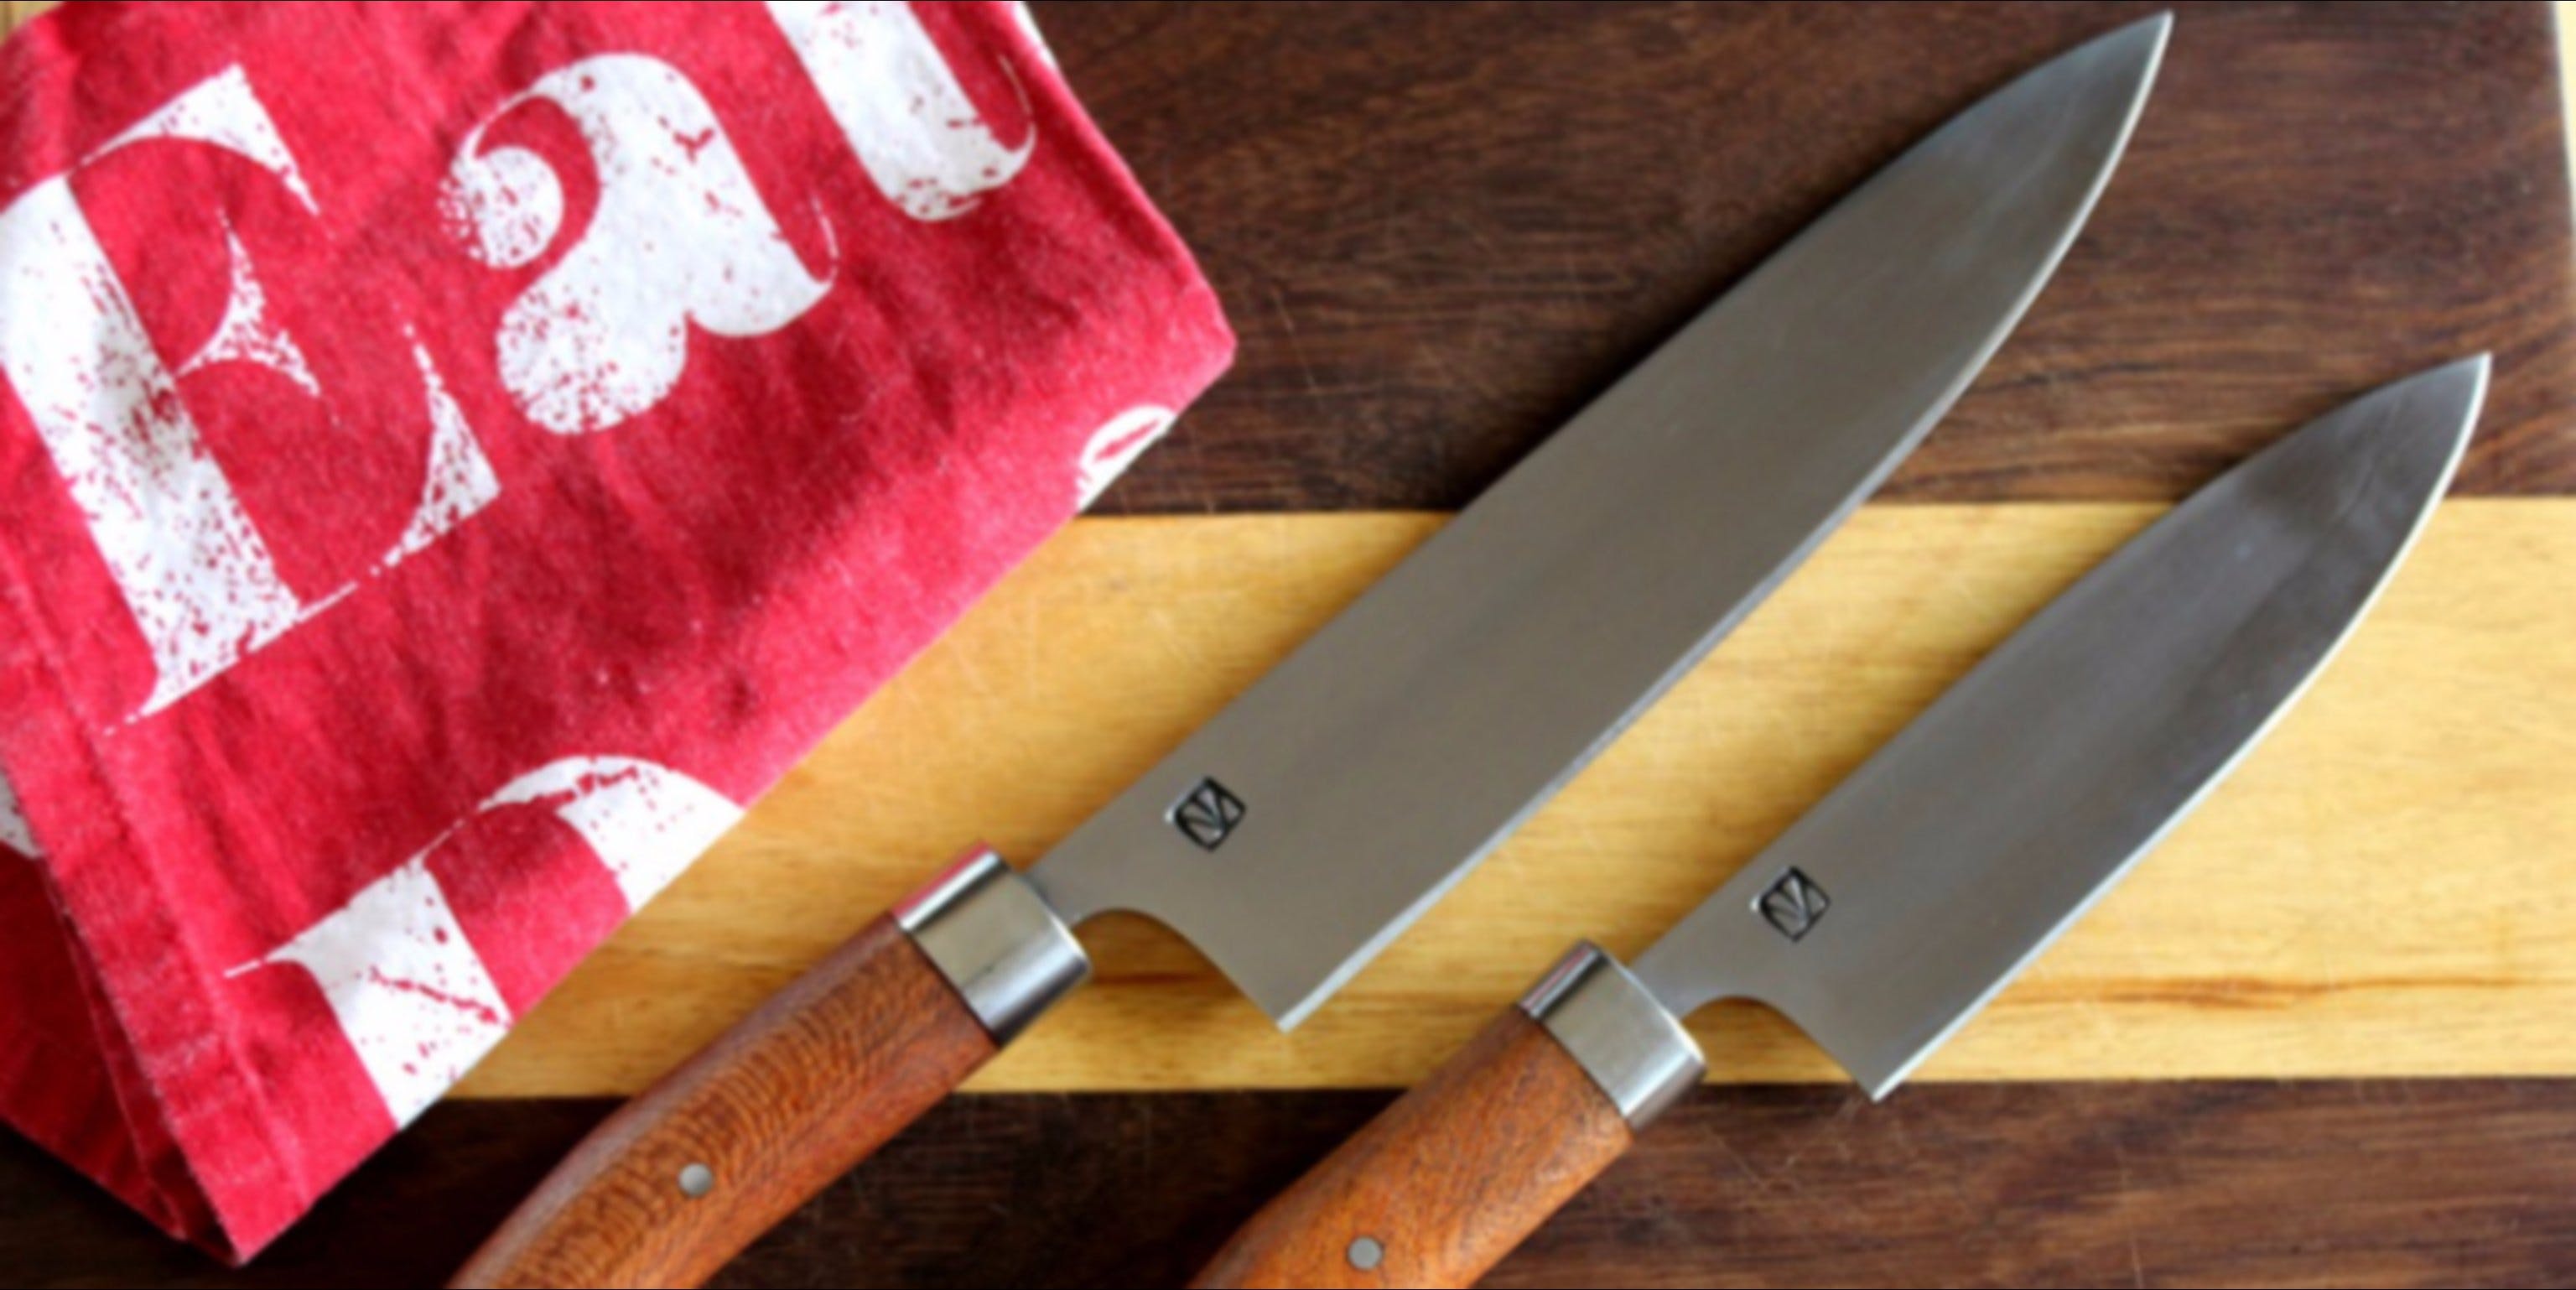 South Coast Knife Show and Rare Artisan Expo - Accommodation Bookings